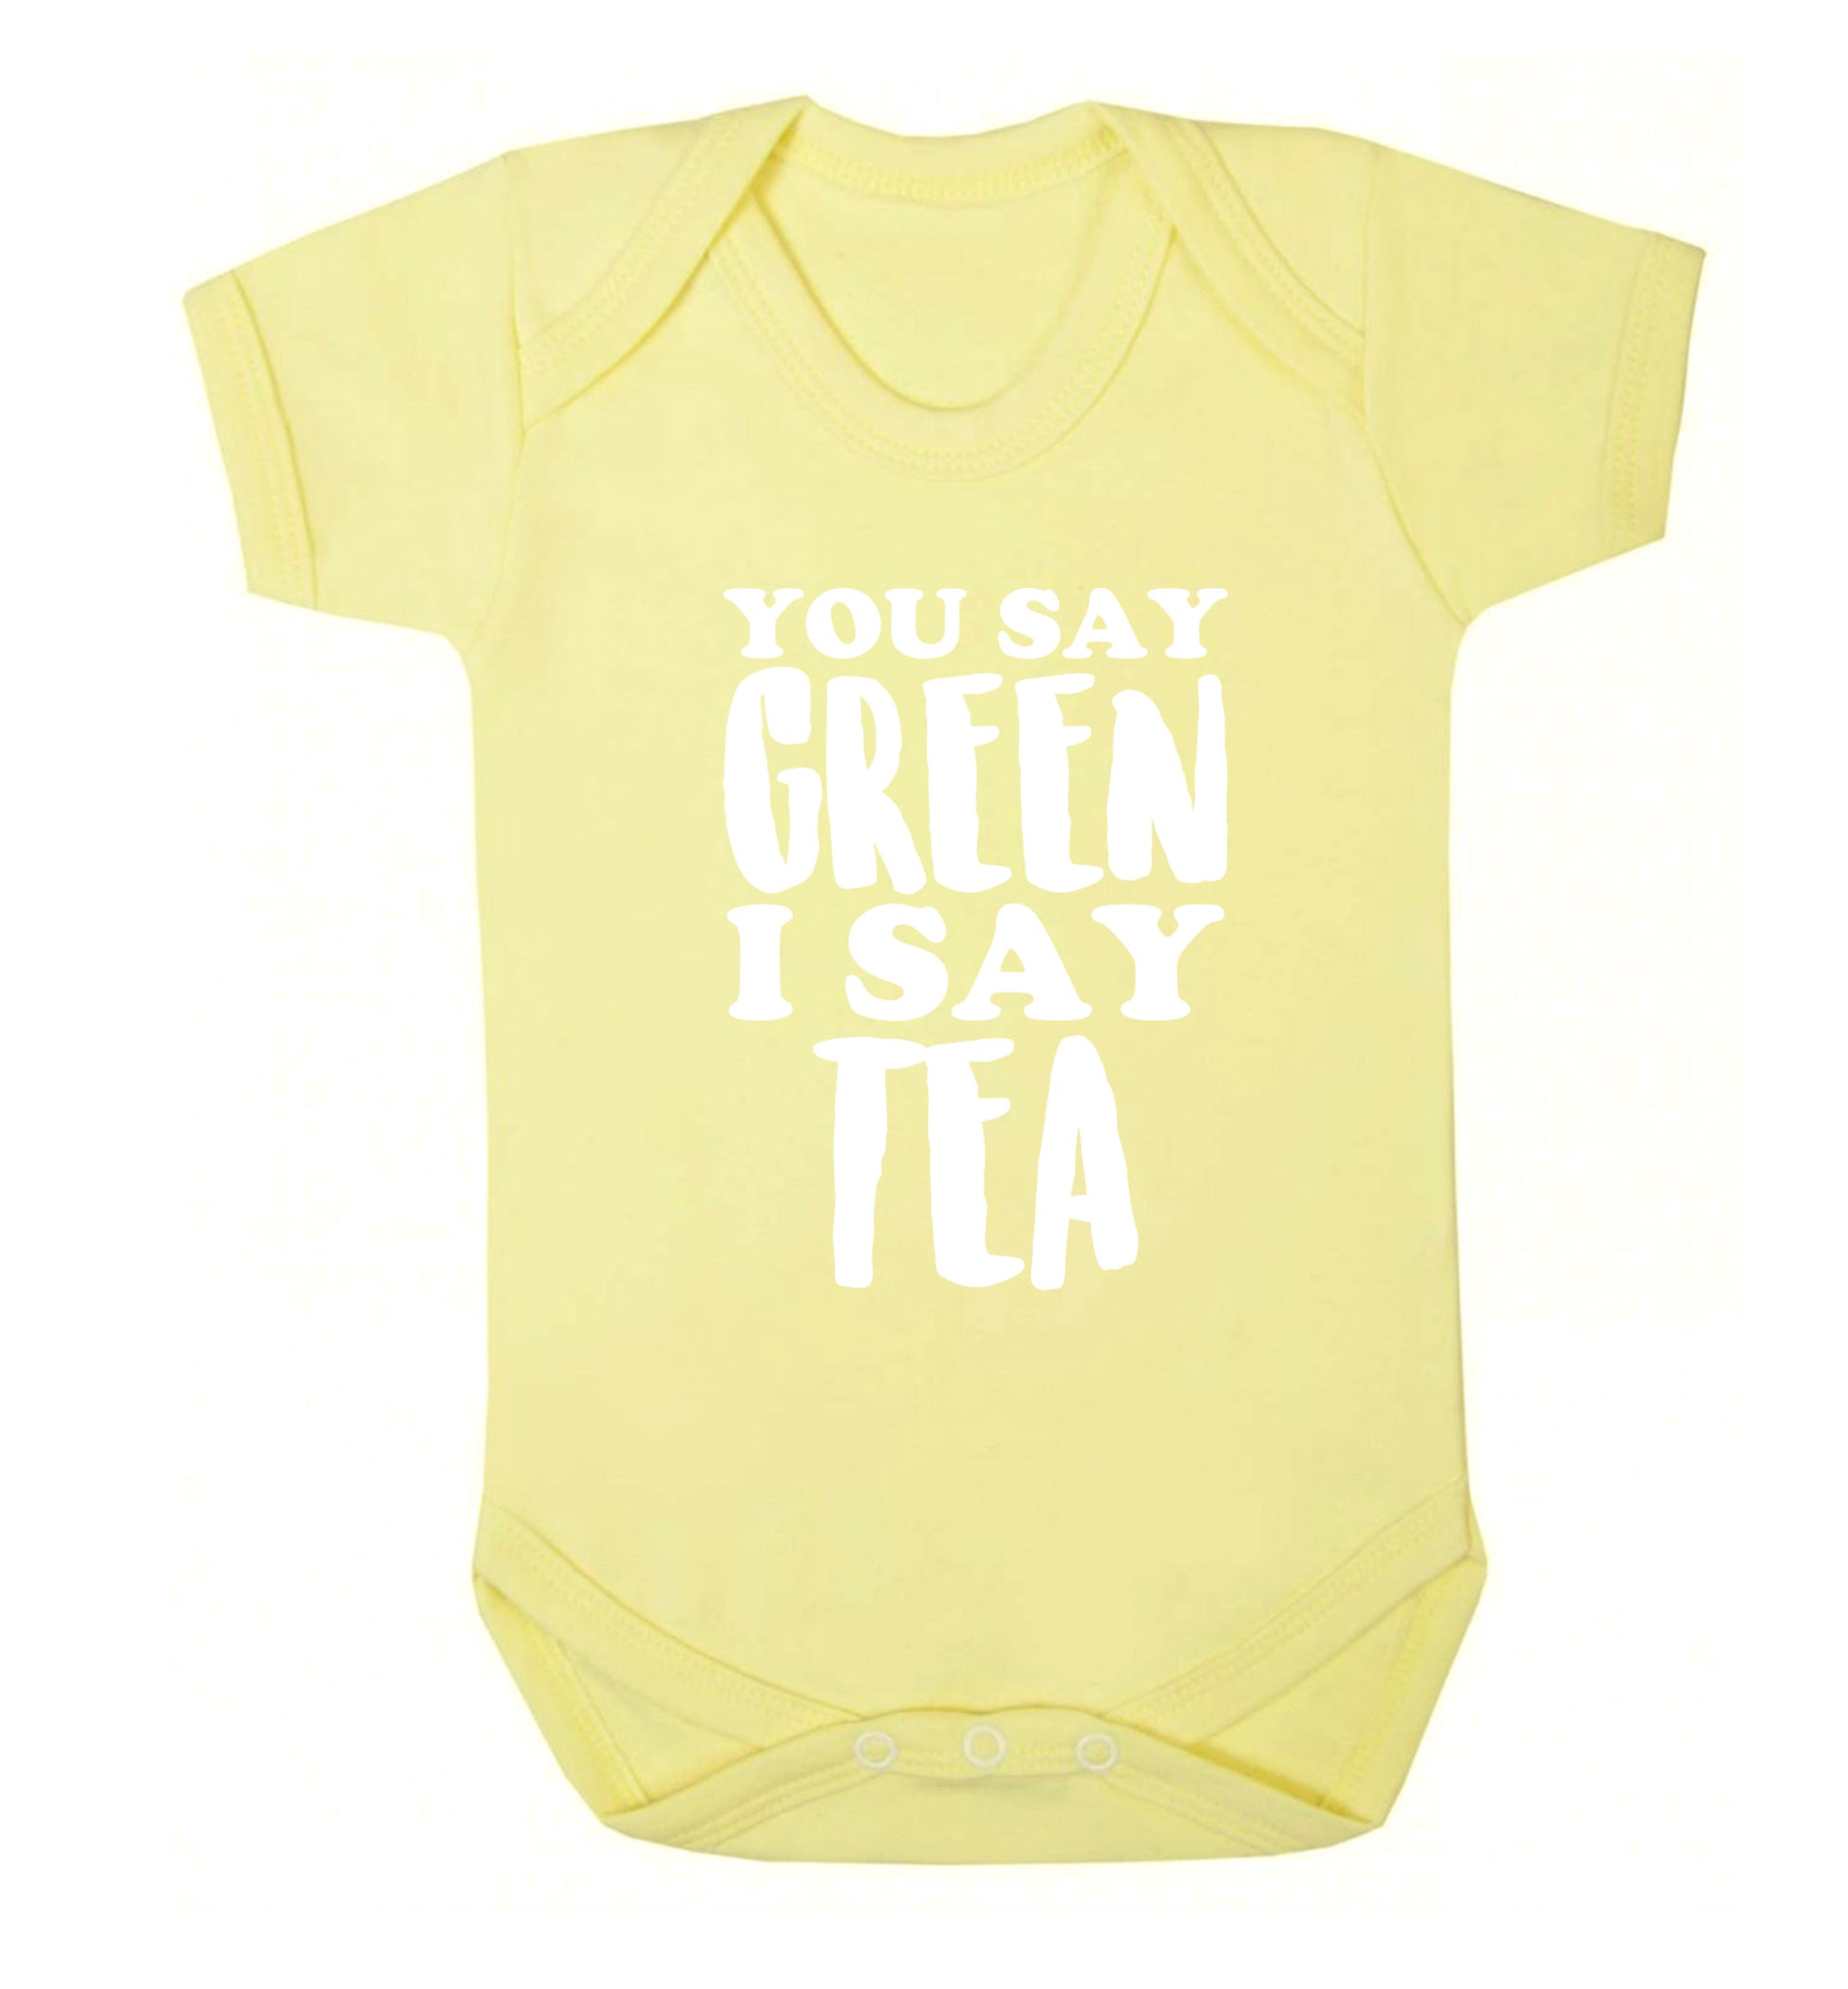 You say green I say tea! Baby Vest pale yellow 18-24 months